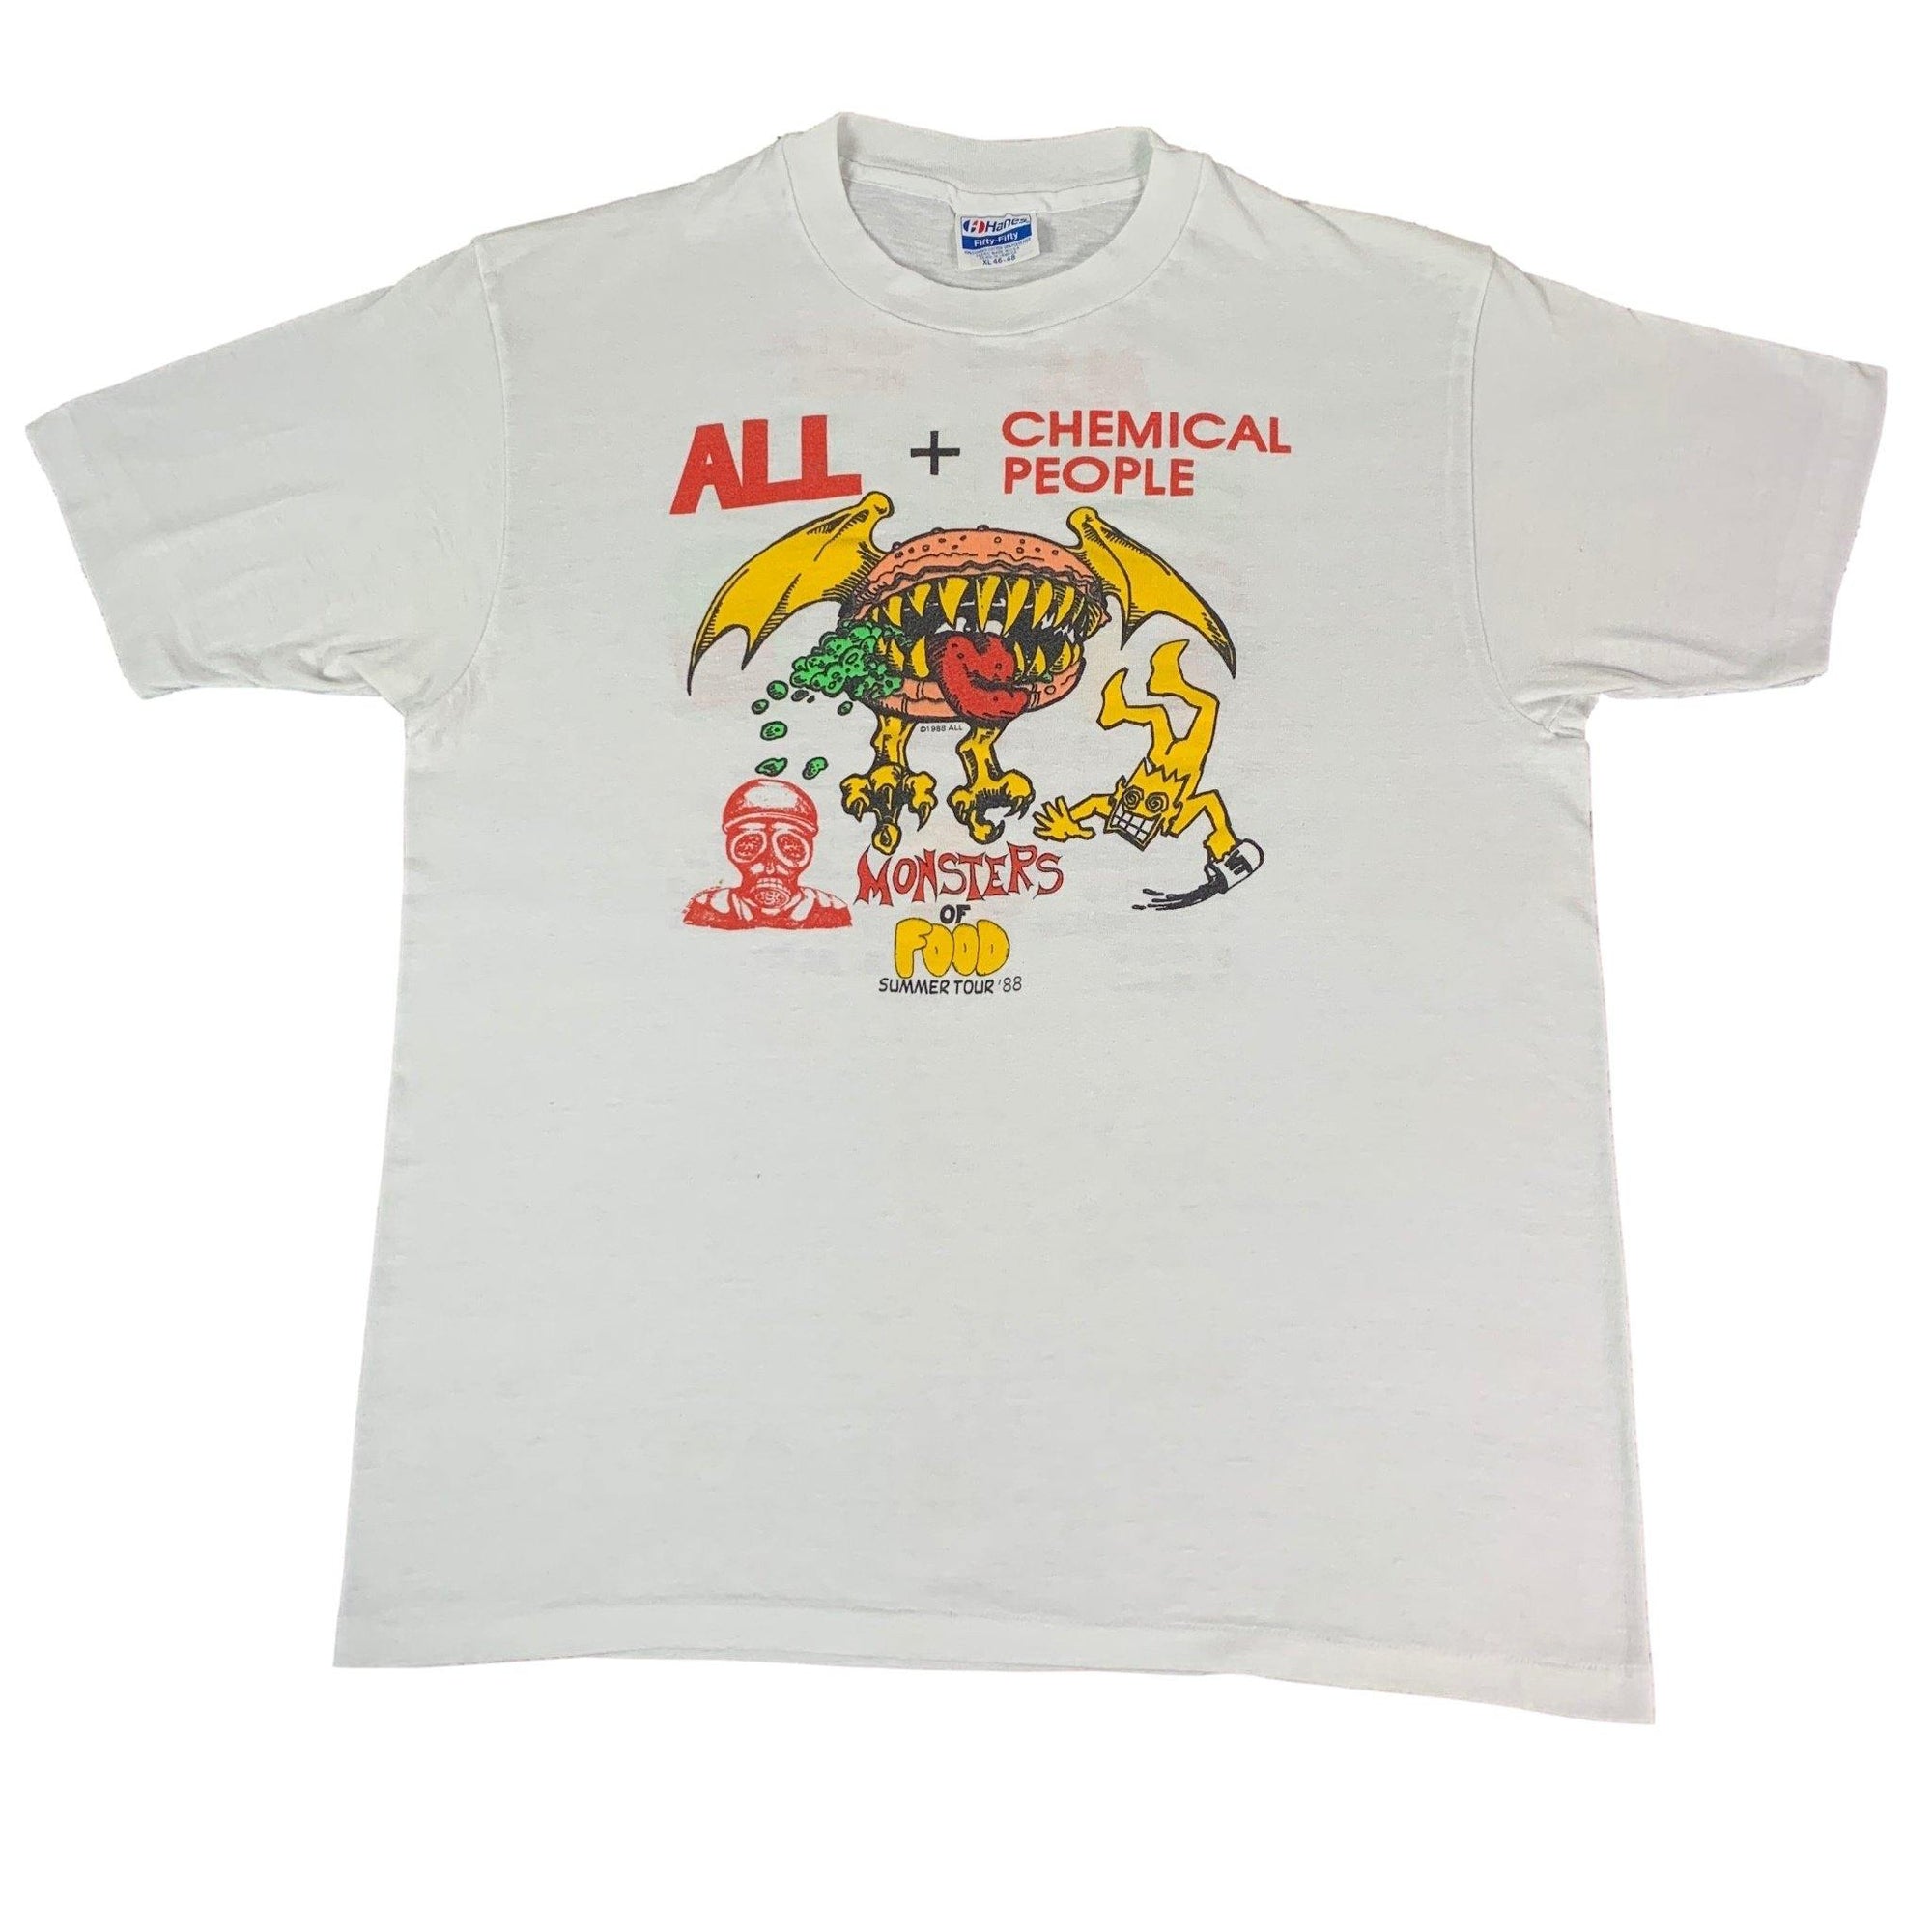 Vintage ALL + Chemical People "Monsters Of Food" T-Shirt - jointcustodydc